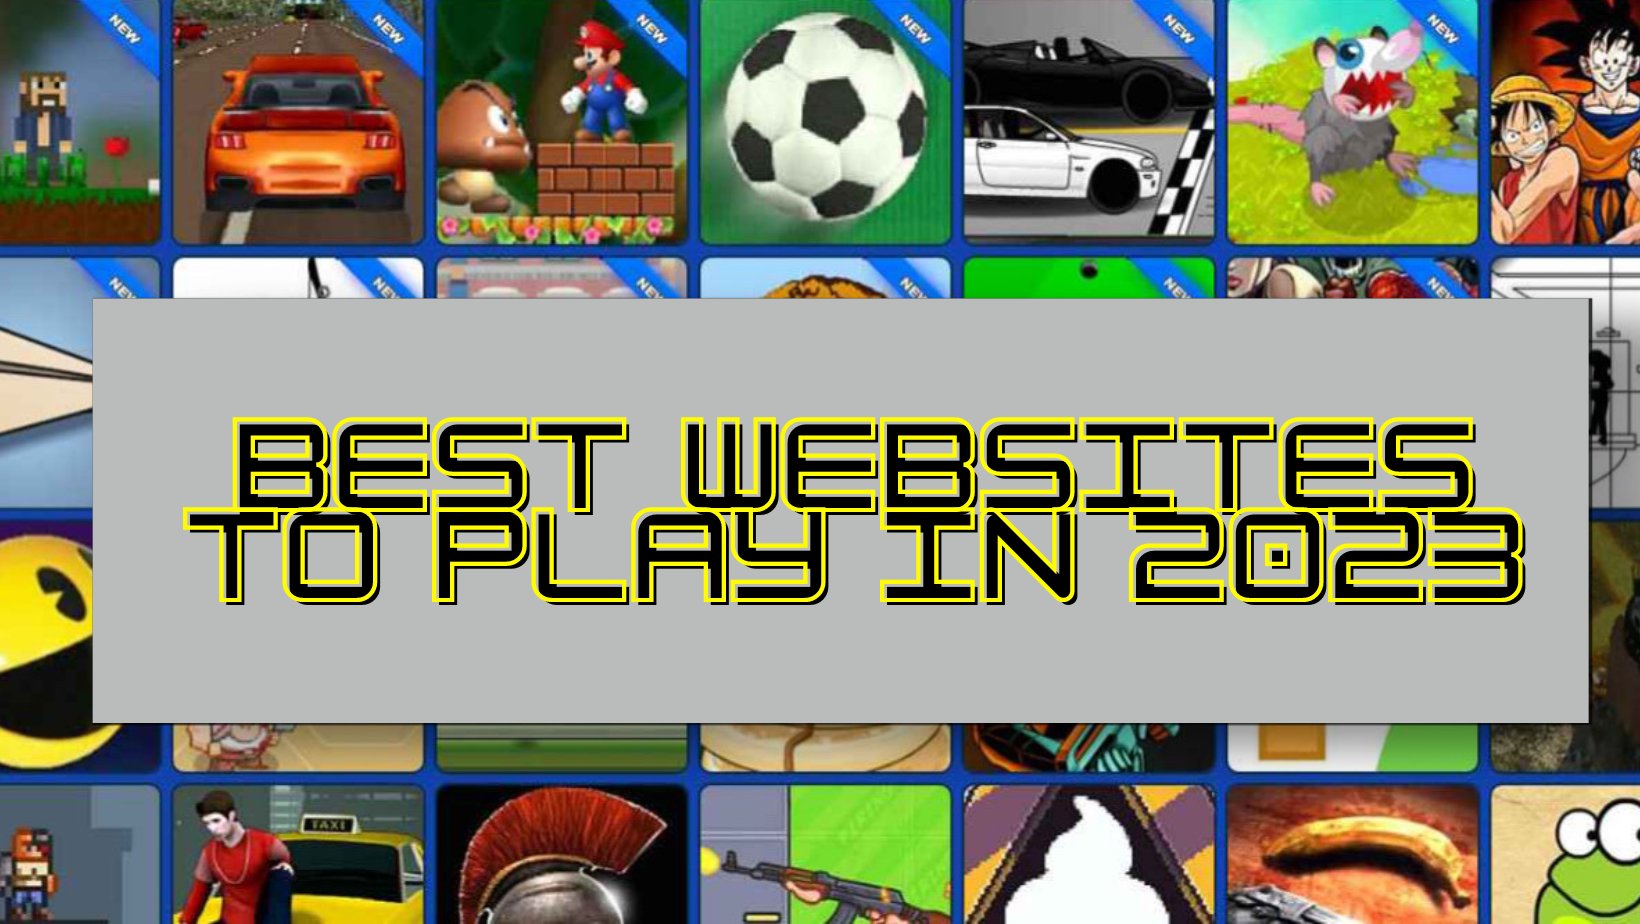 Unblocked Games WTF: BEST Websites to Play in 2023